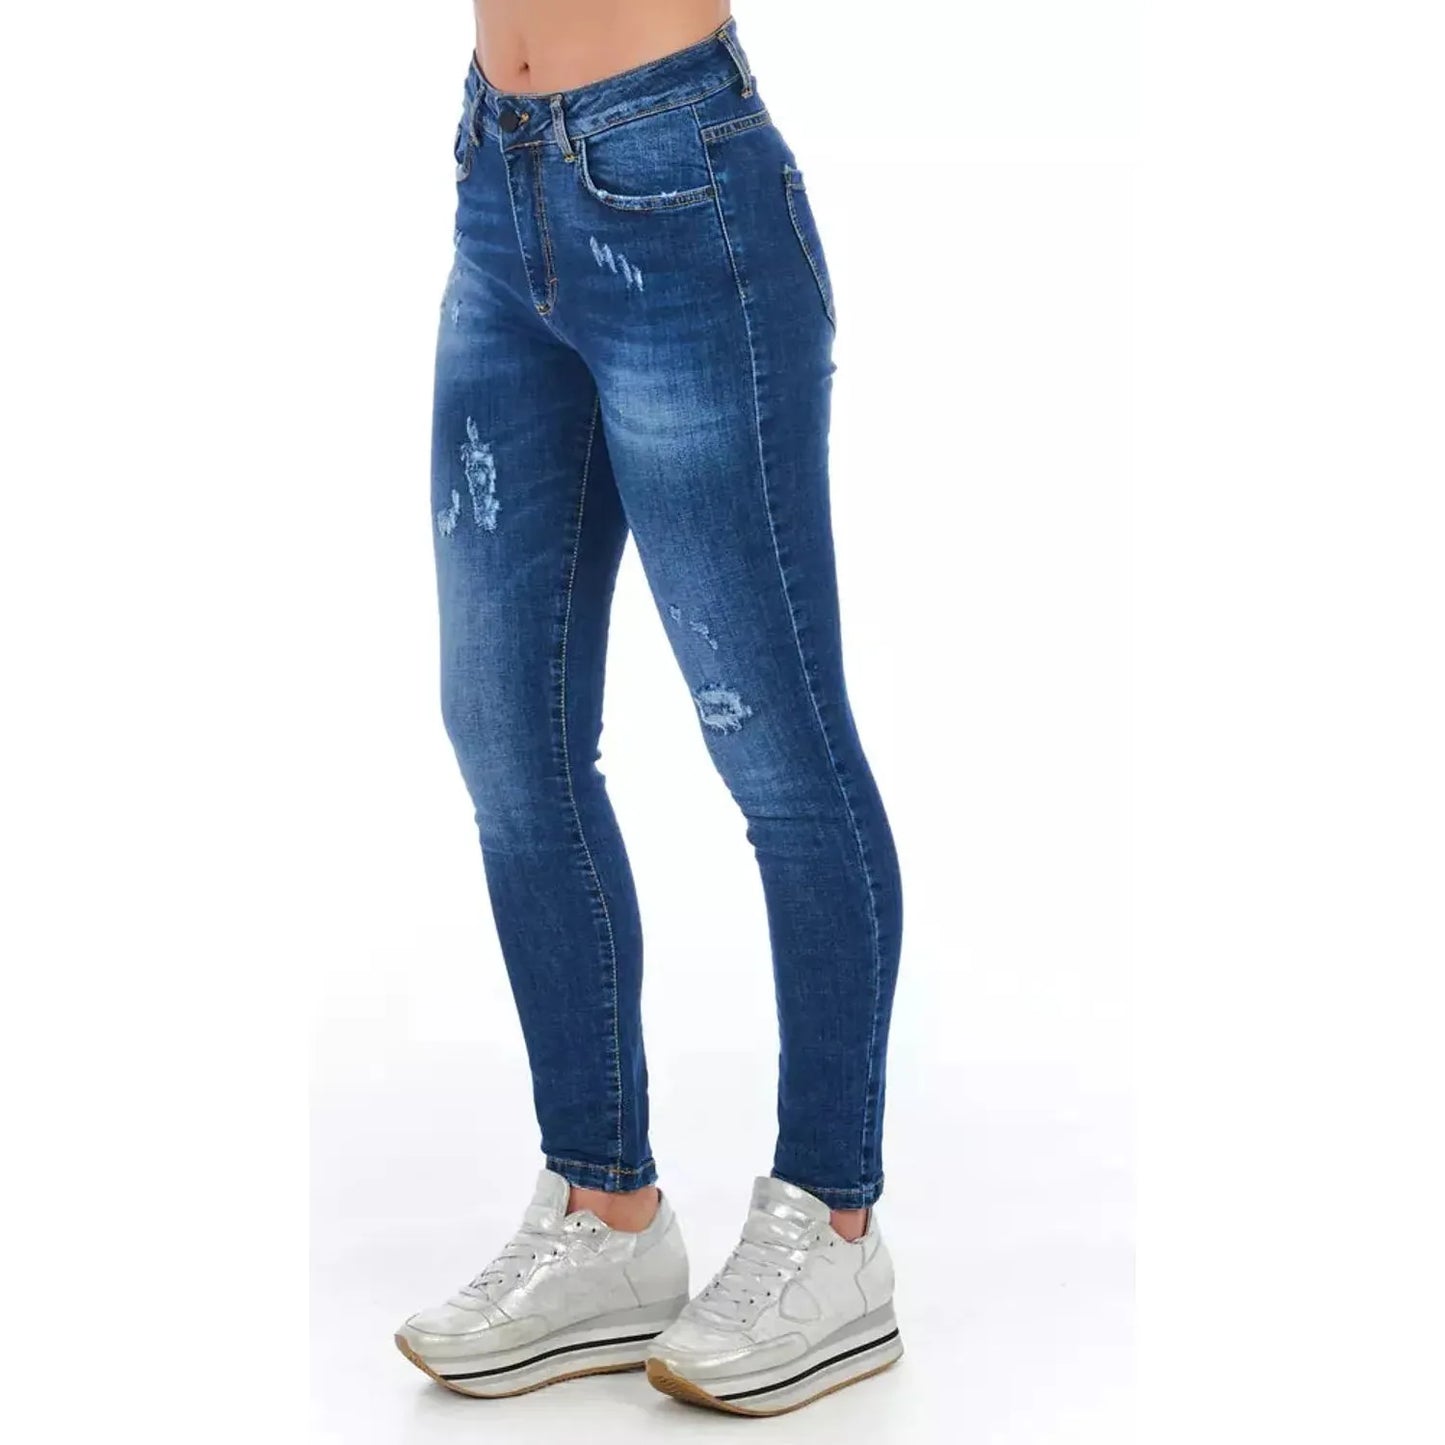 Frankie Morello Chic Worn Wash Denim Jeans for Sophisticated Style blue-jeans-pant-5 stock_product_image_21771_930589044-29-98cf3bf4-906.webp